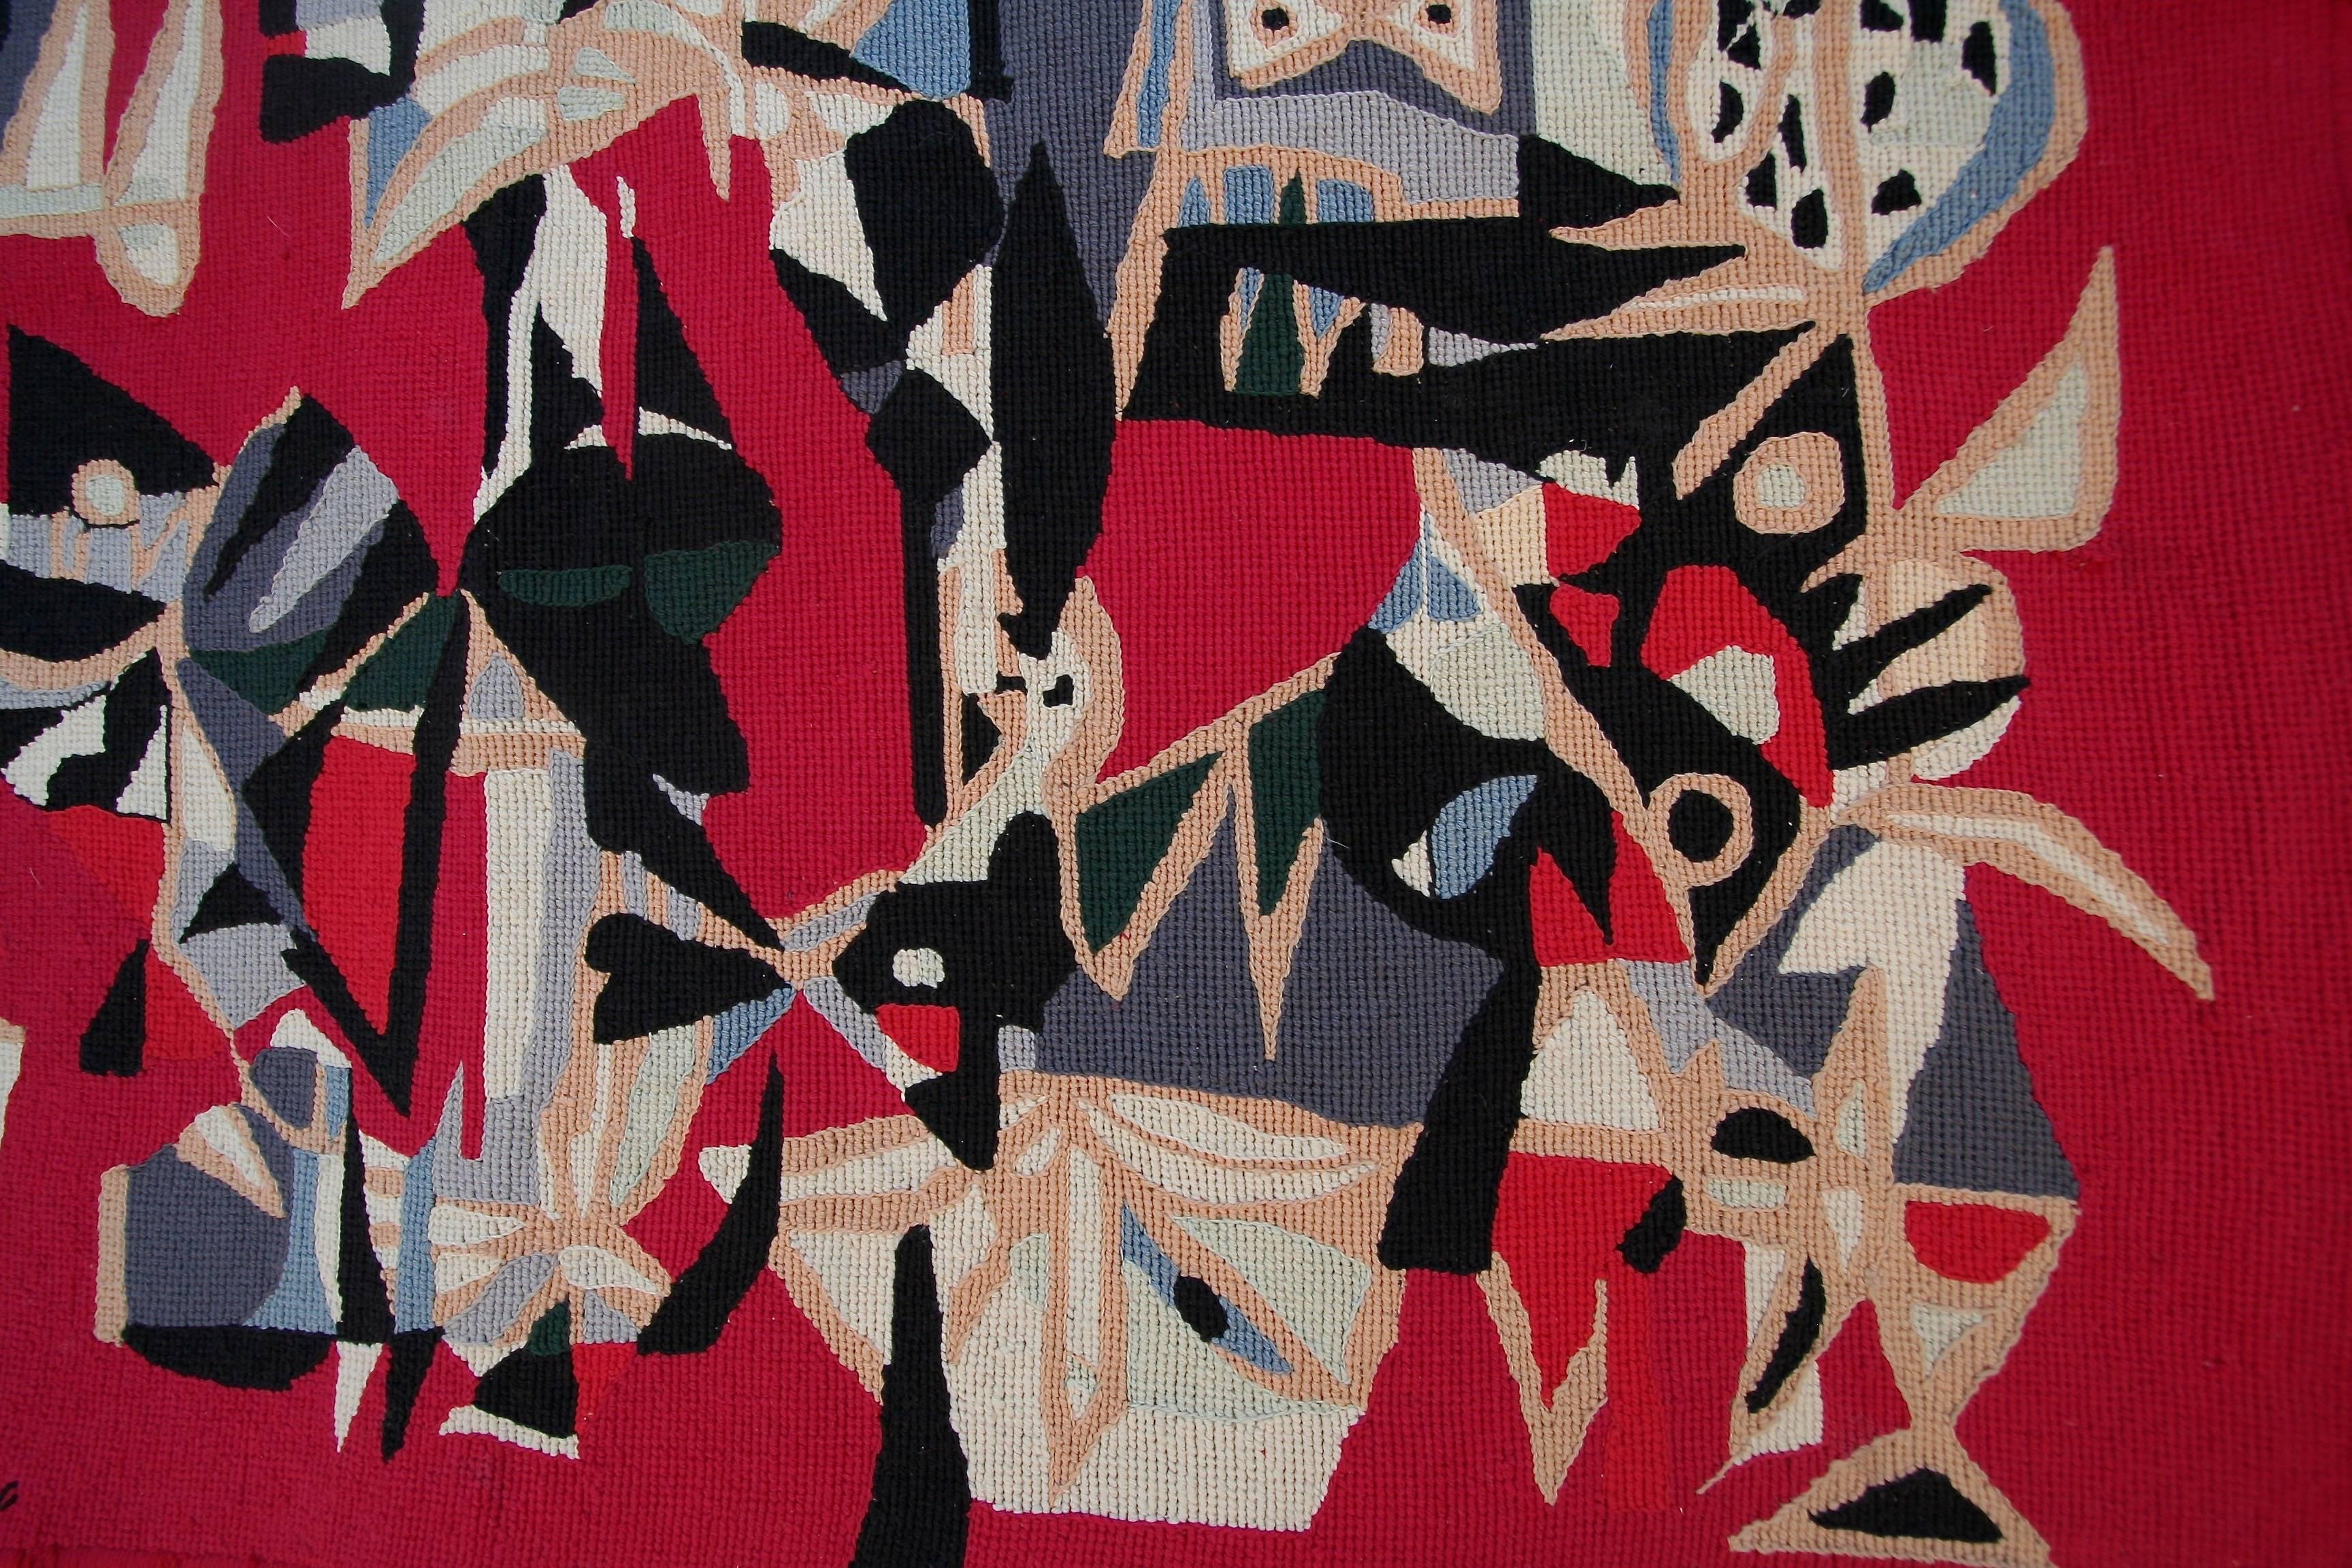 Mid-Century Modern Brazilian Embroidered Abstract Red Tapestry by Genaro de Carvalho, 1960s For Sale